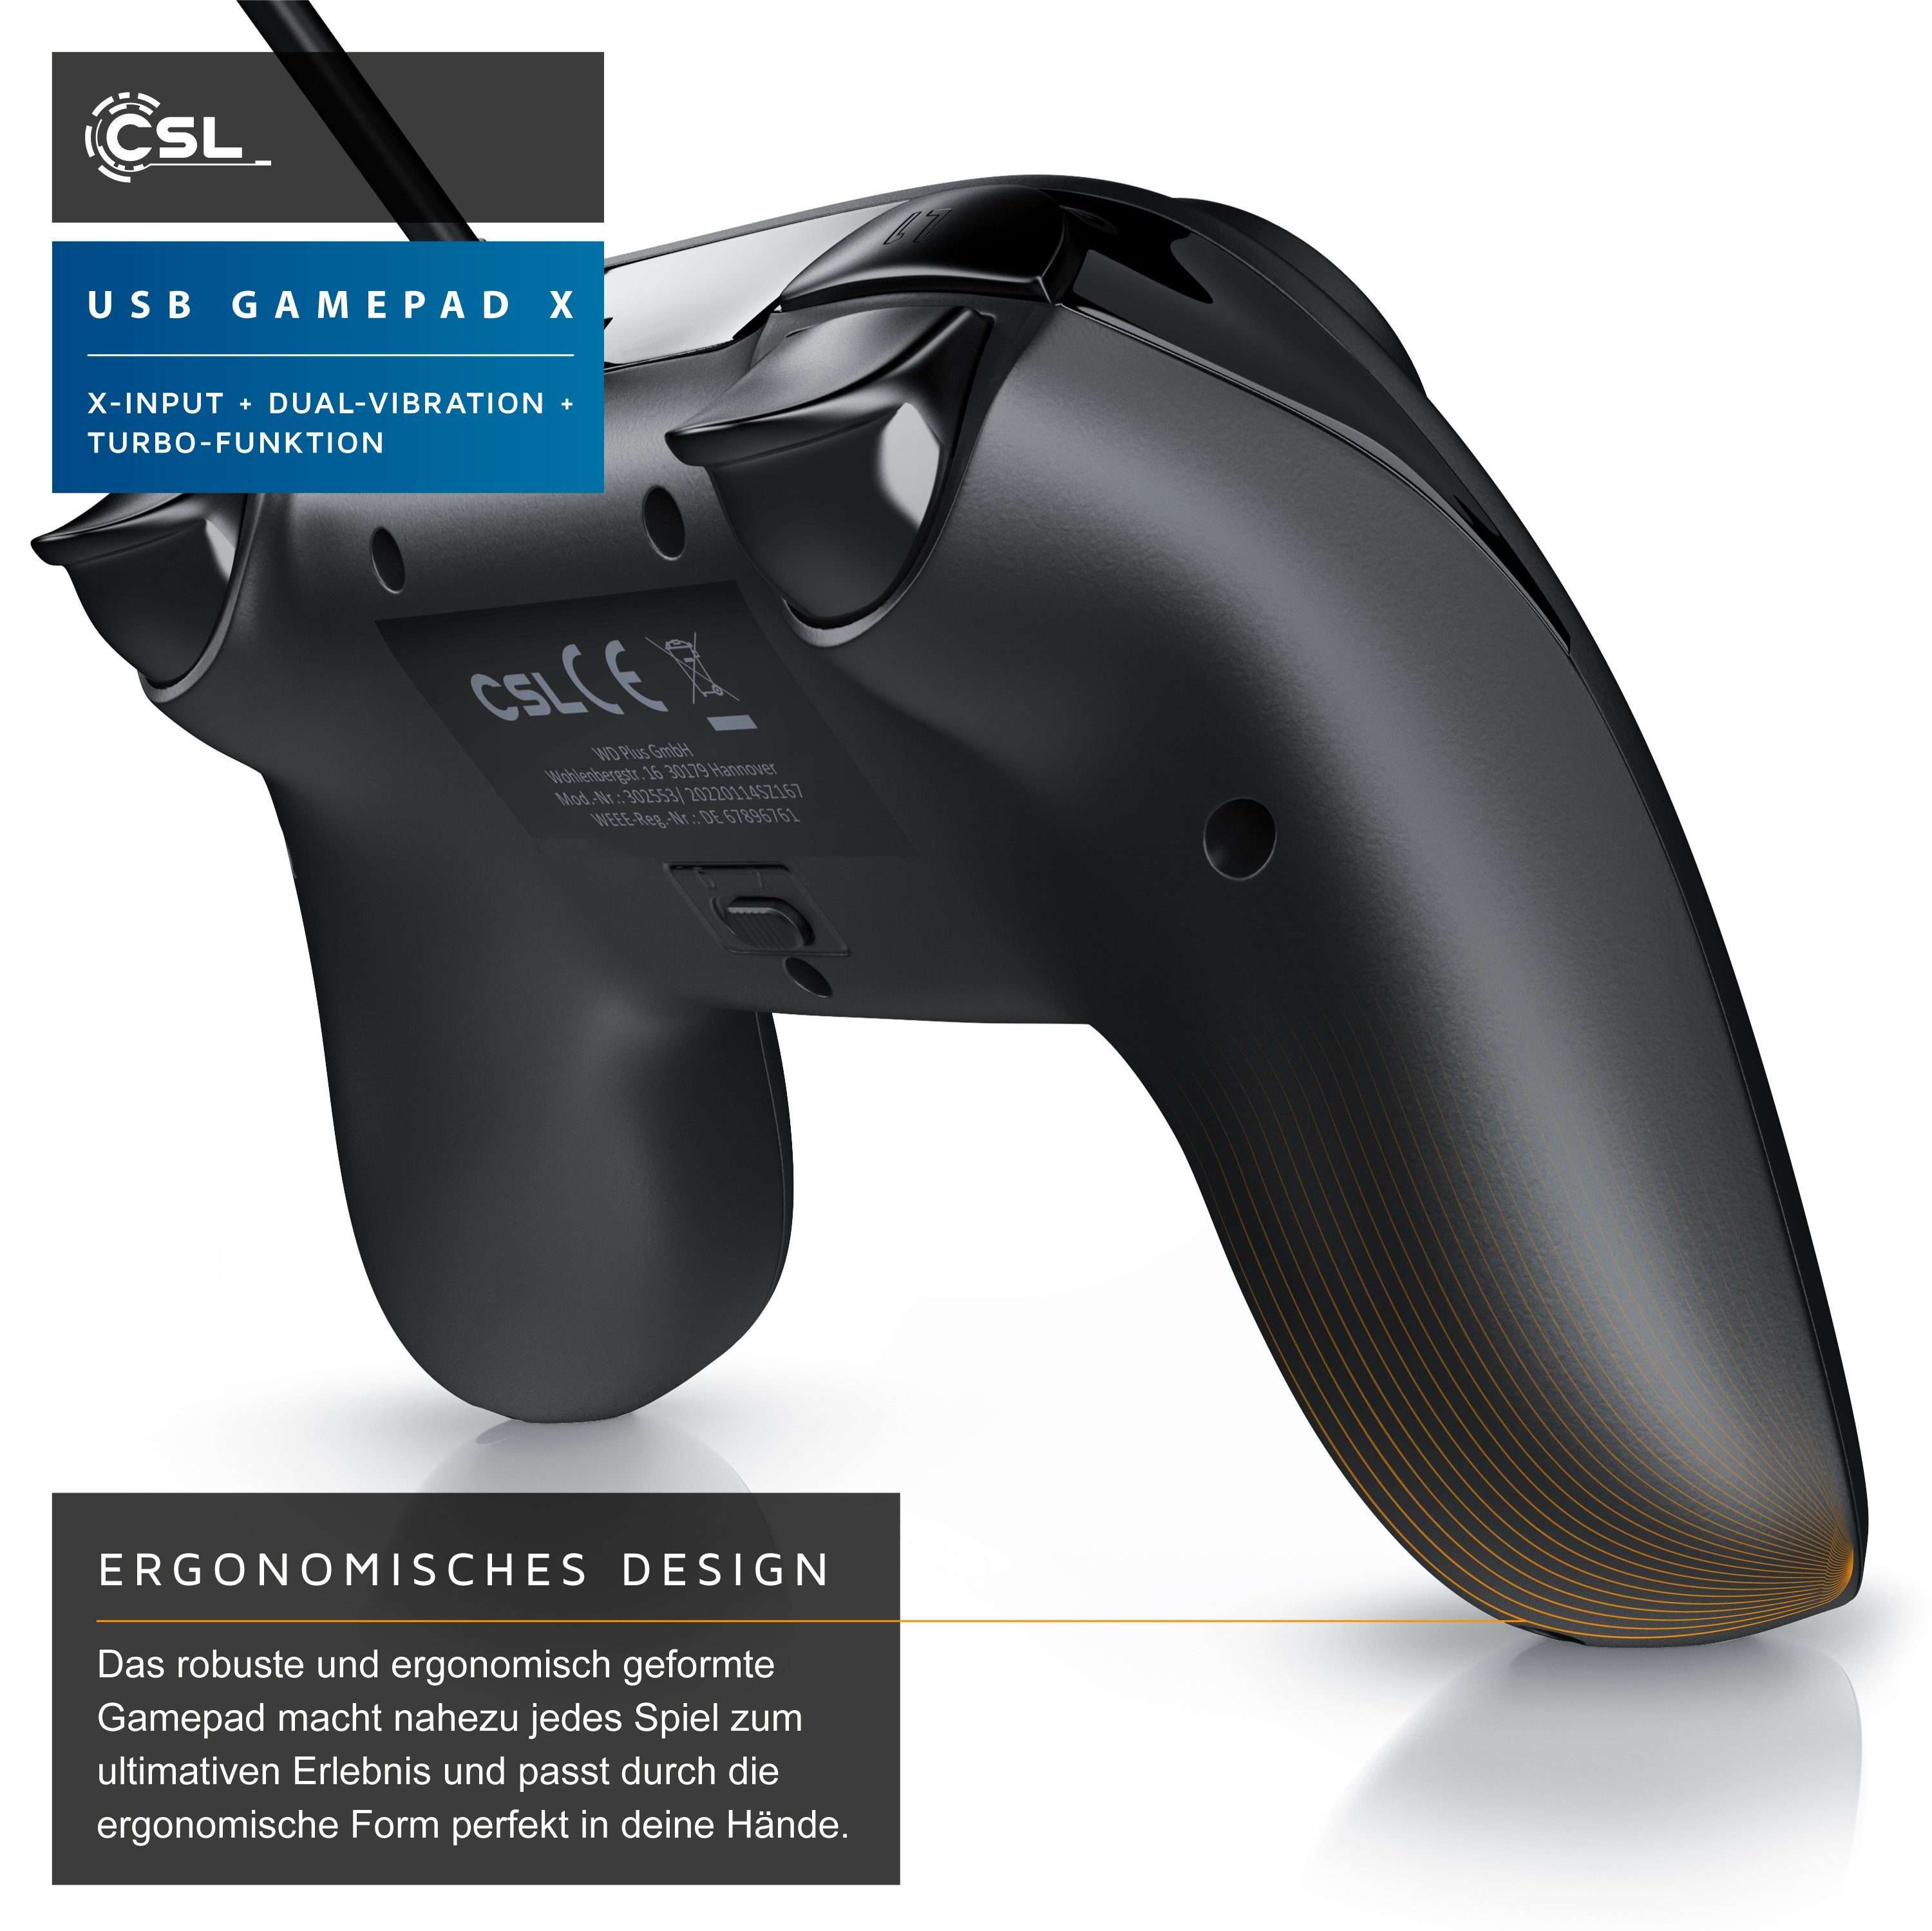 CSL Gaming-Controller (1 Funktion, Direct PS3 PC Vibration, Gamepad, & Turbo & St., X-Input) Dual